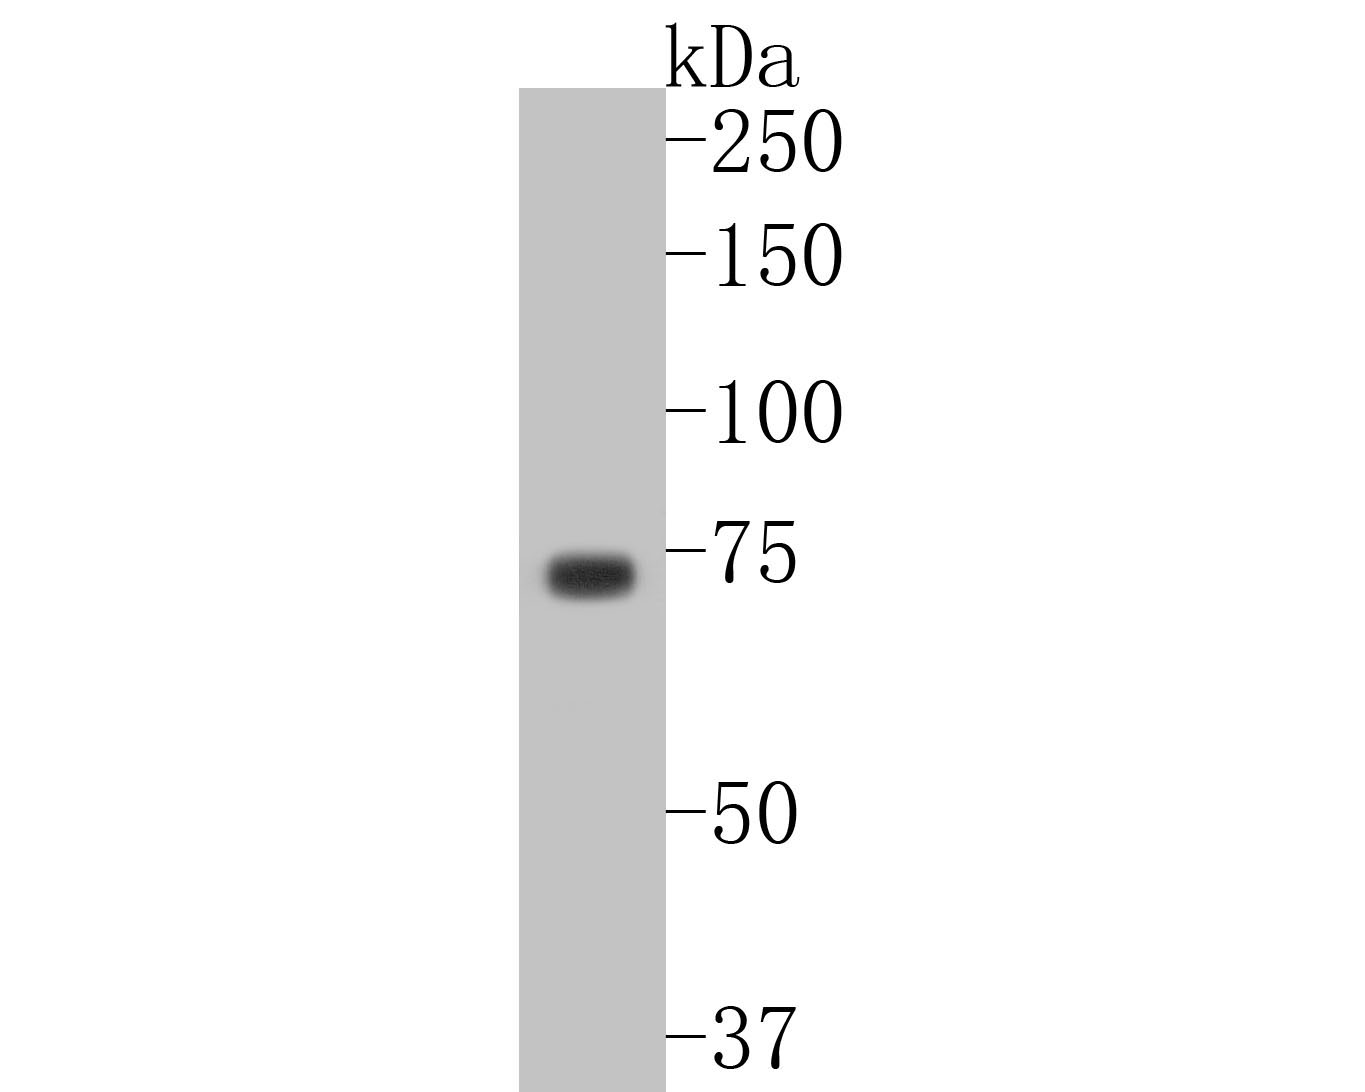 Western blot analysis of p63 on A431 cell lysates. Proteins were transferred to a PVDF membrane and blocked with 5% BSA in PBS for 1 hour at room temperature. The primary antibody (ET1610-44, 1/500) was used in 5% BSA at room temperature for 2 hours. Goat Anti-Rabbit IgG - HRP Secondary Antibody (HA1001) at 1:5,000 dilution was used for 1 hour at room temperature.